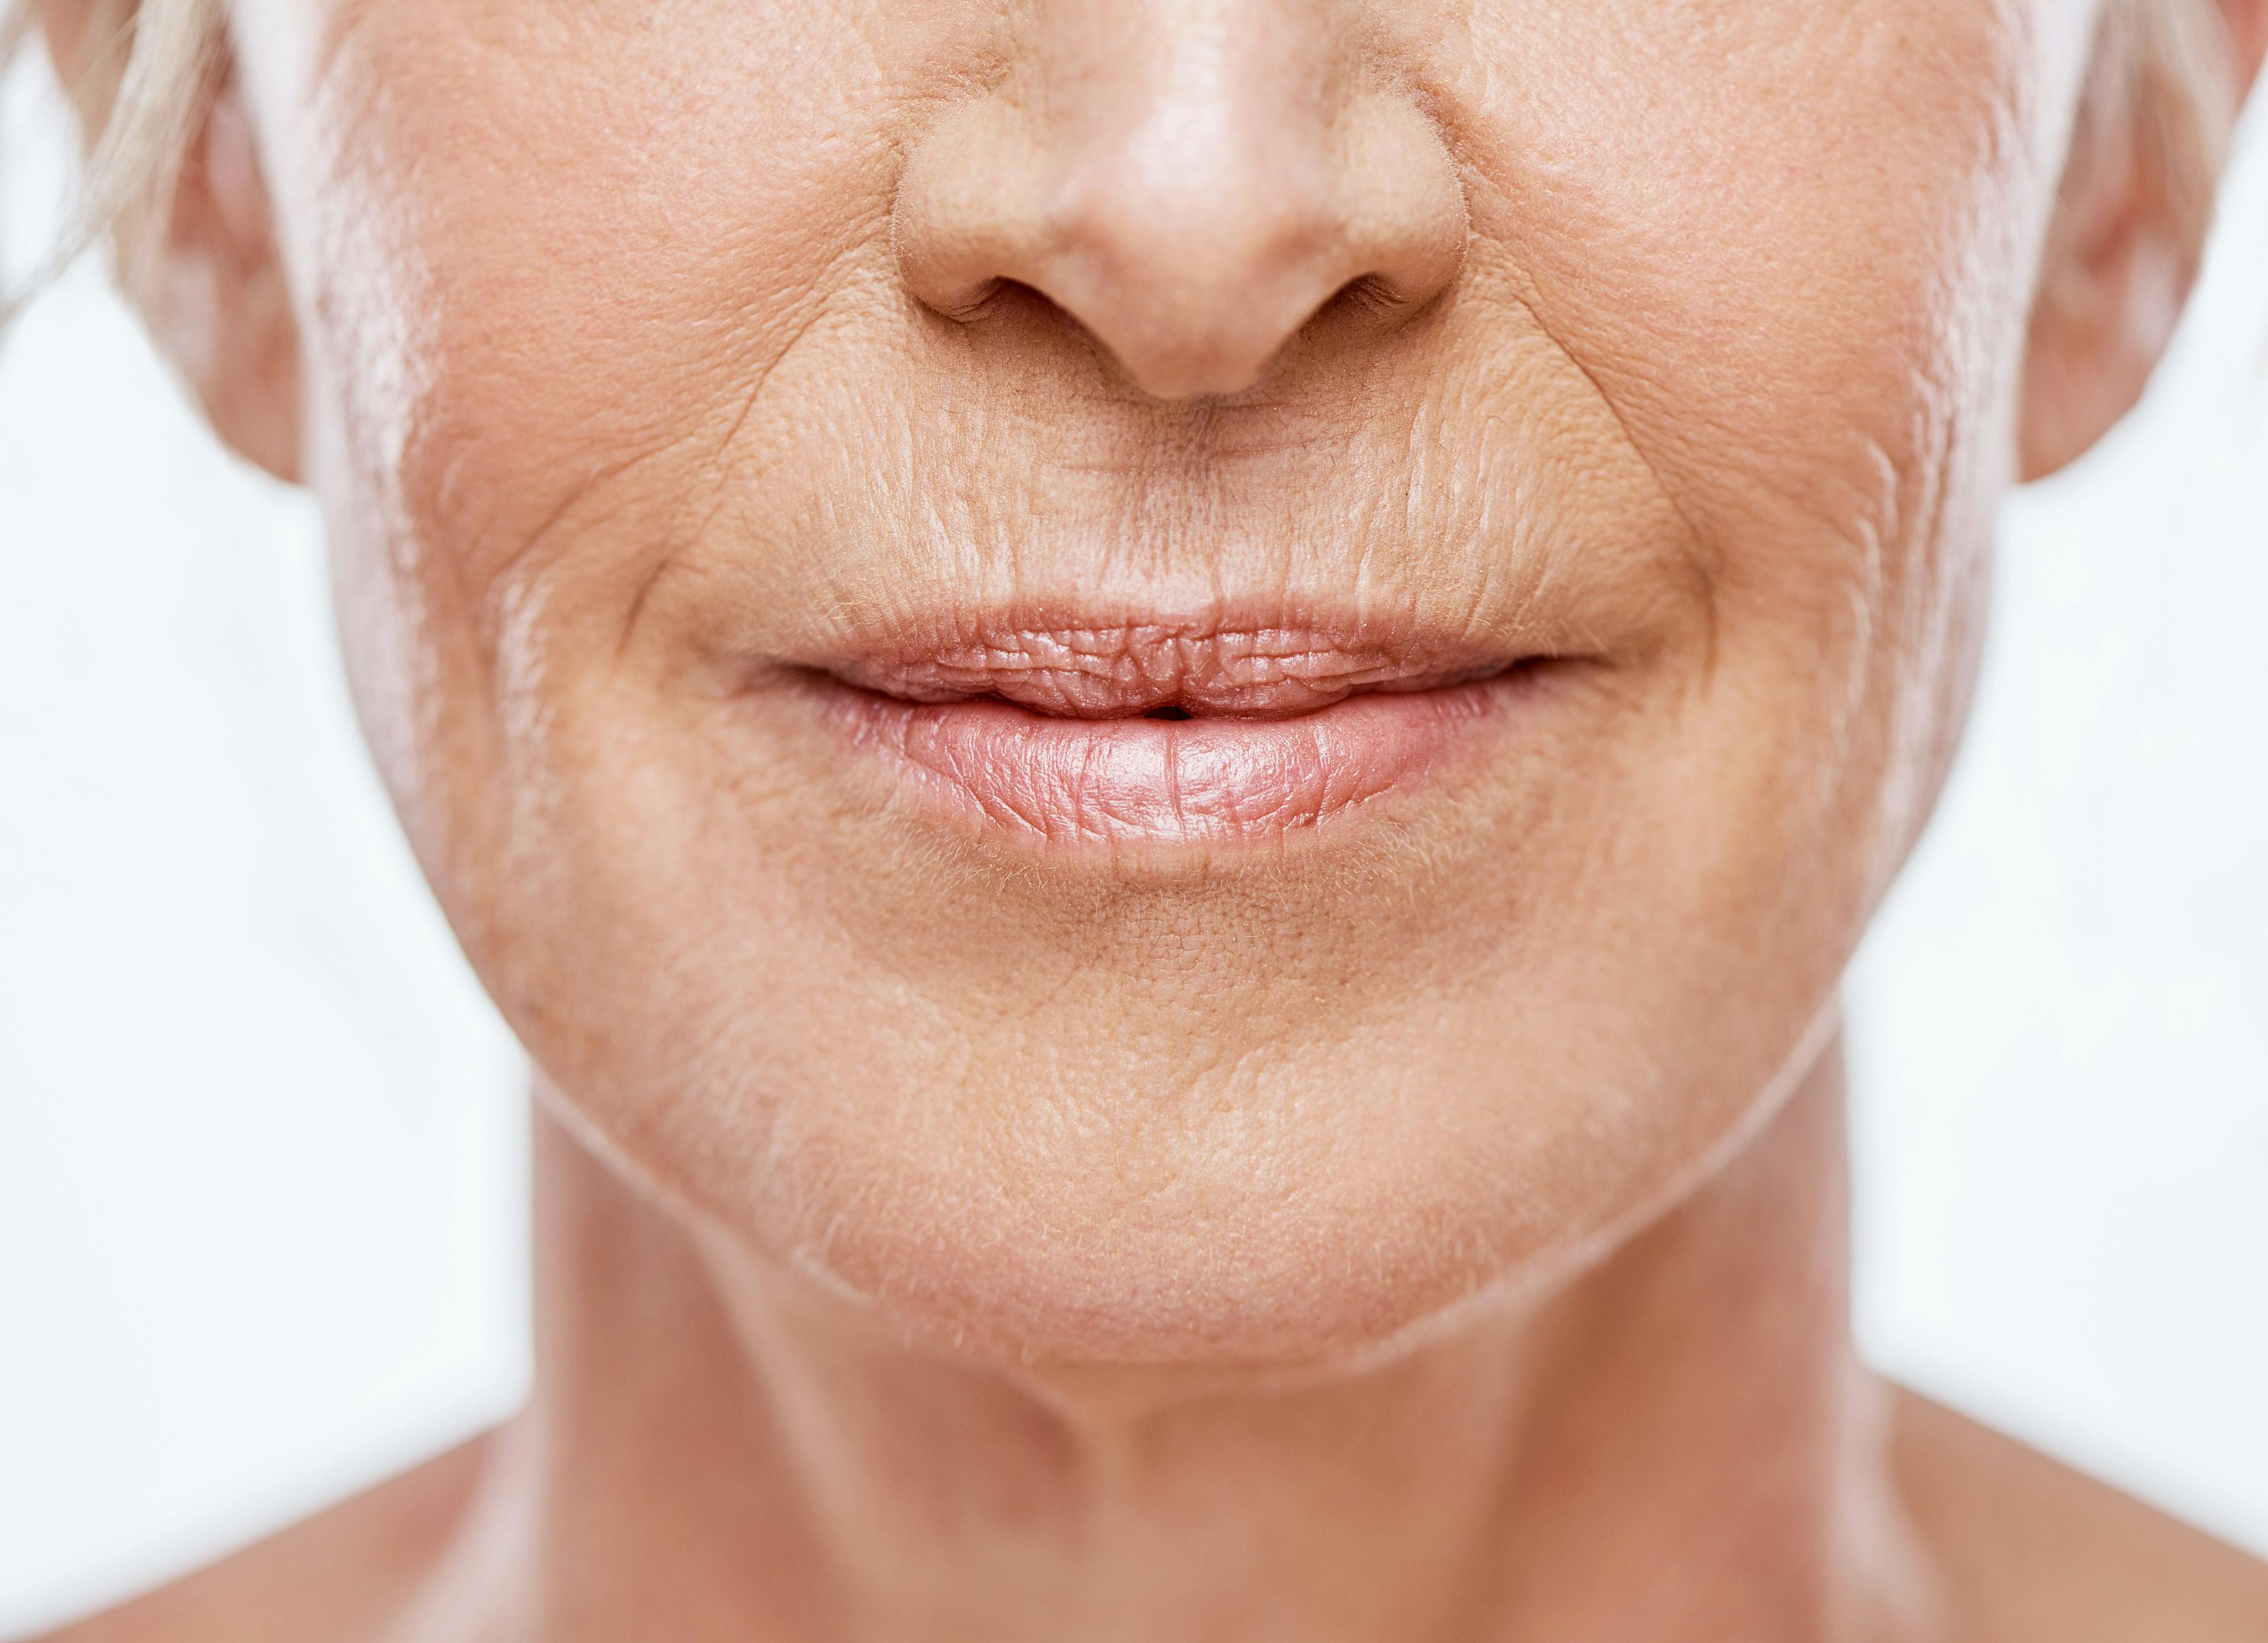 Sofwave Precise SUPERB Applicator FDA Cleared for Improving Facial Lines, Wrinkles